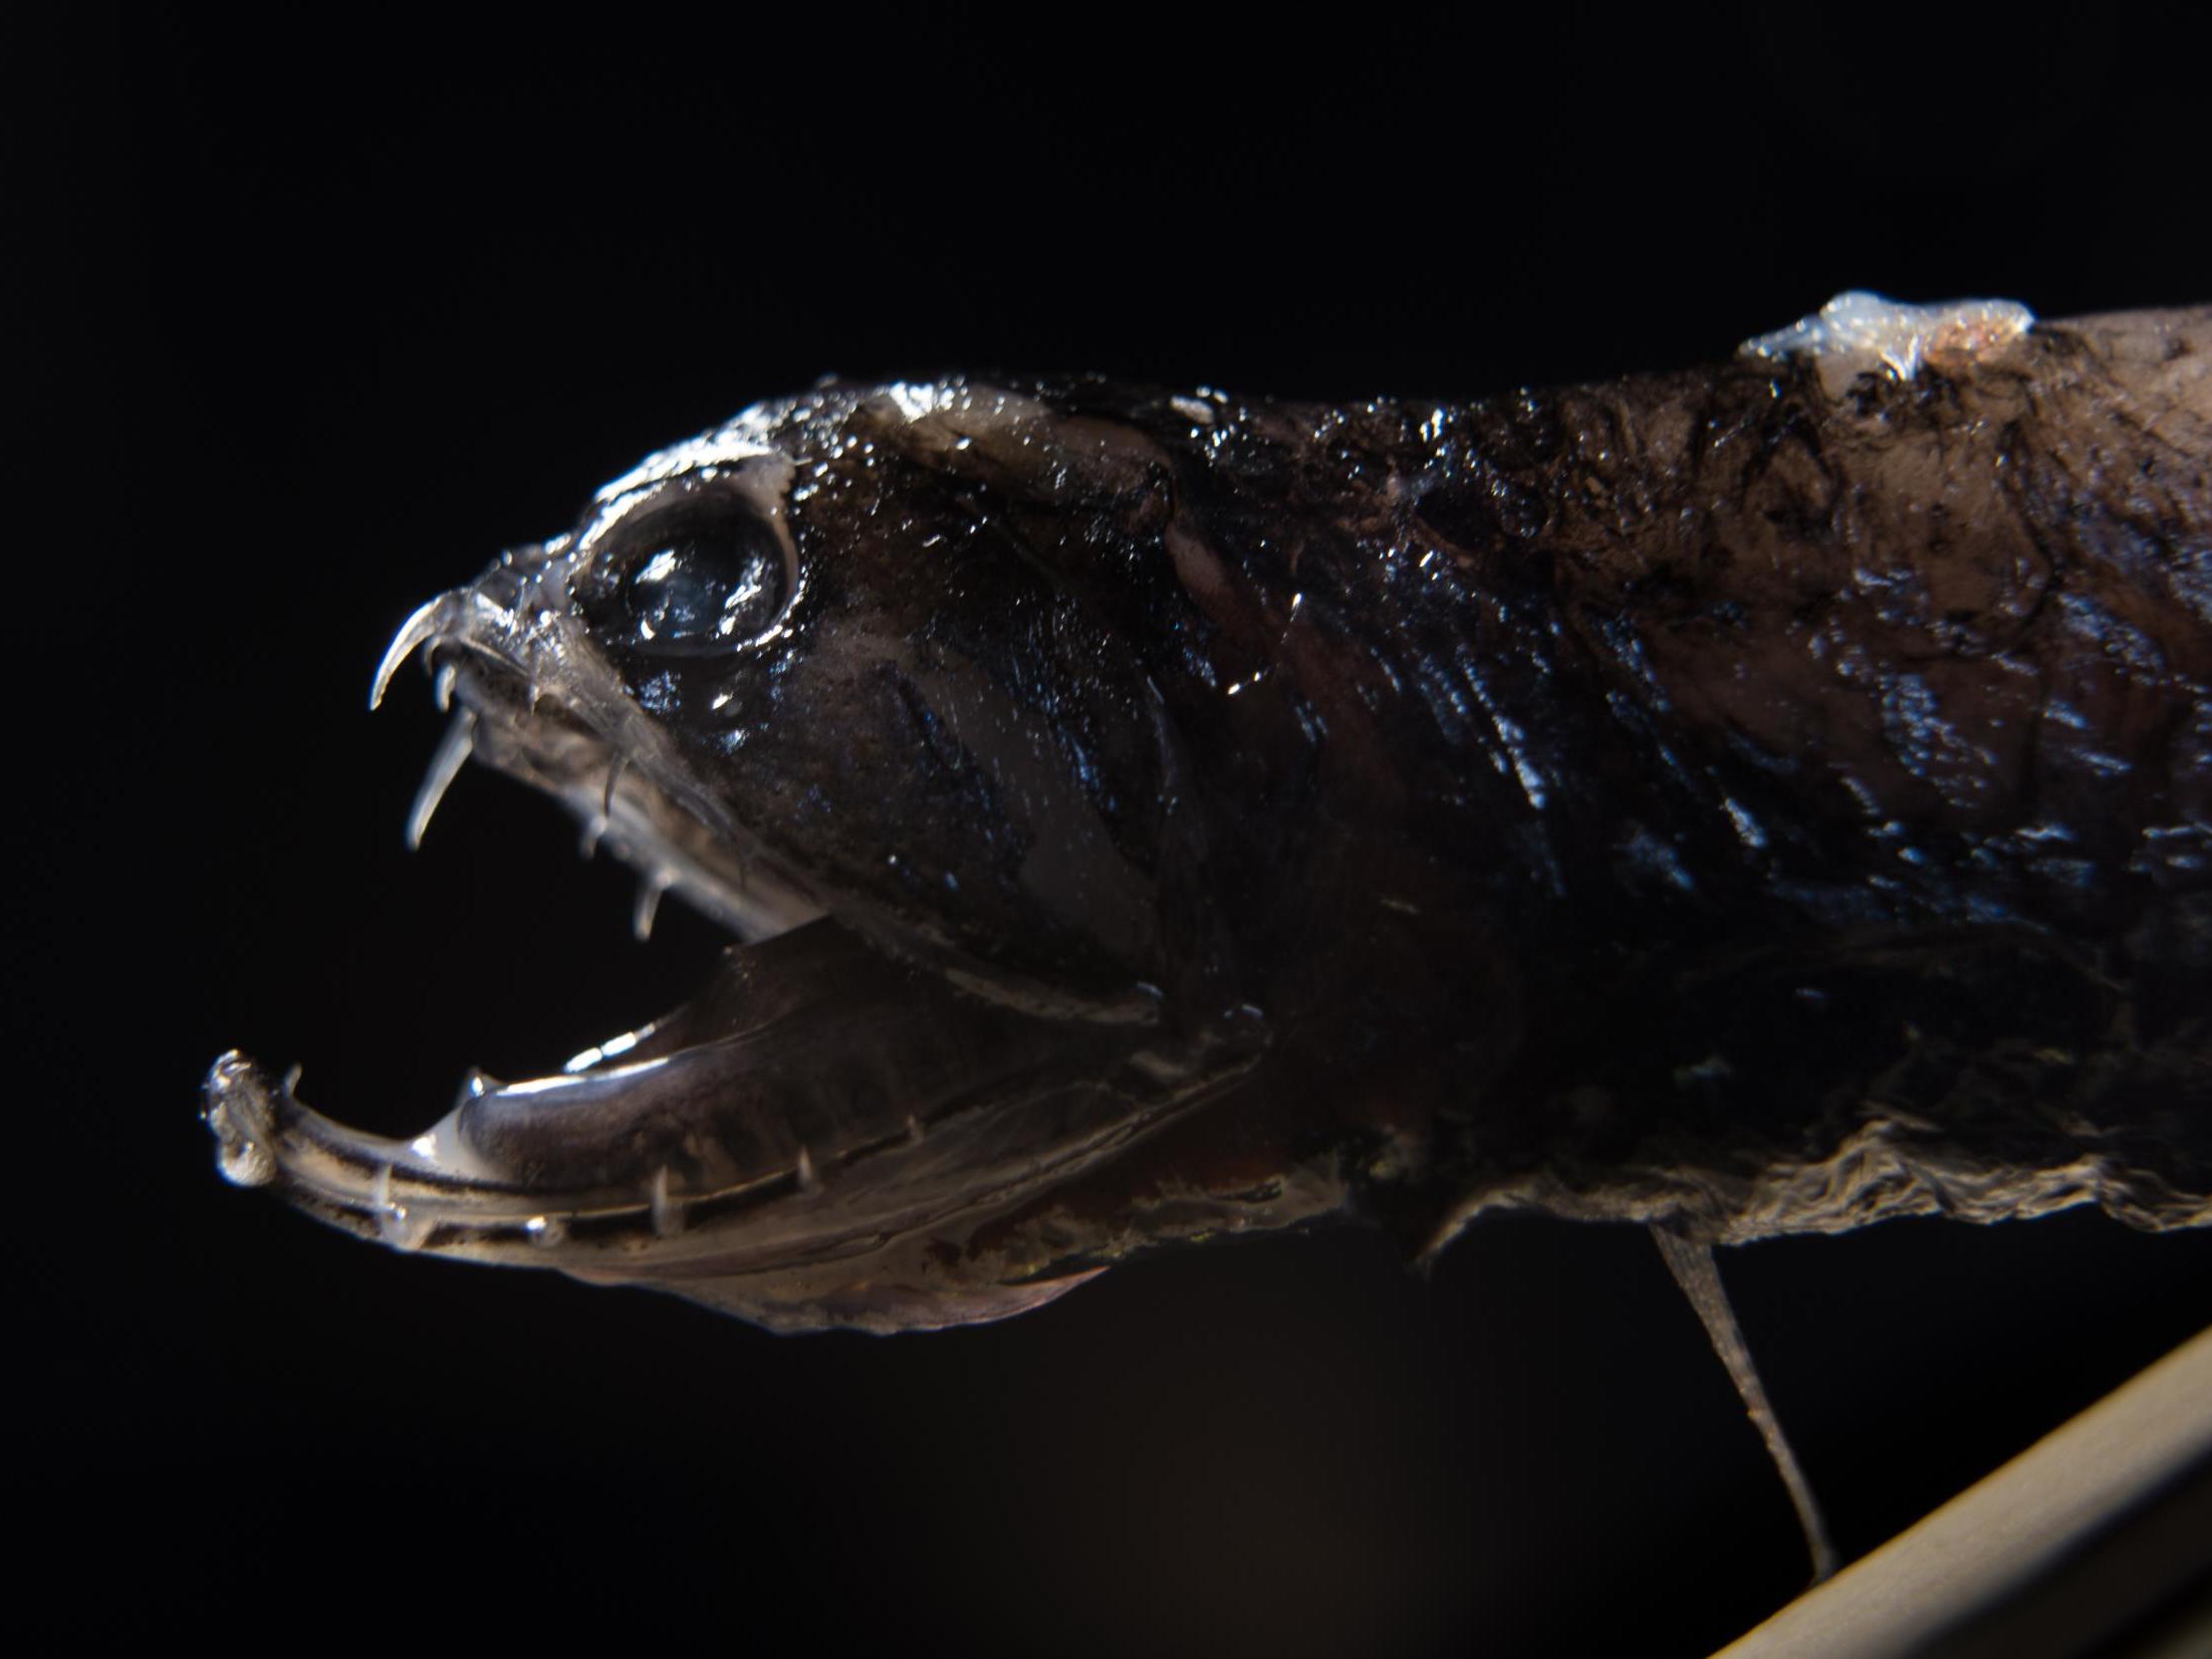 Deep-sea dragonfish are apex predators and feed on fish that are up to half their size